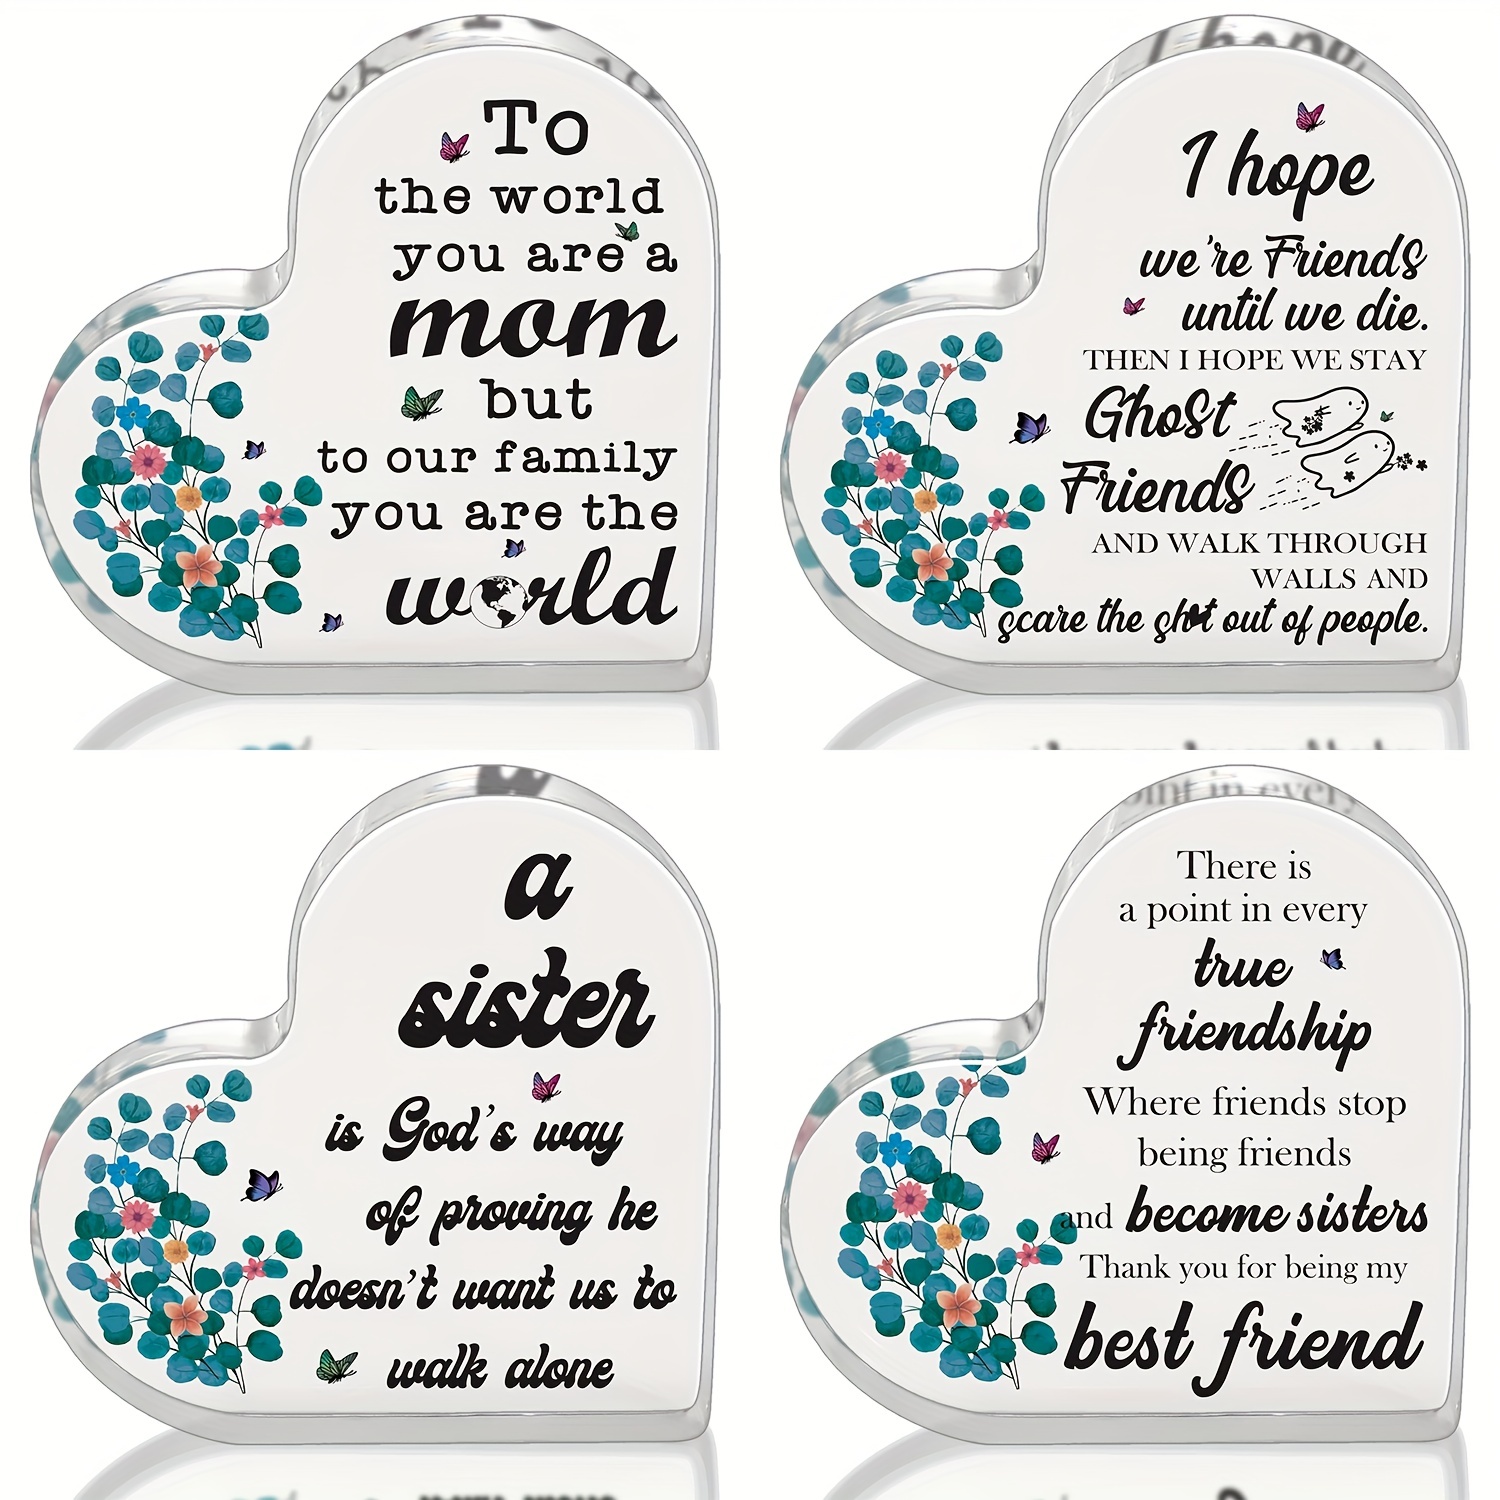 Unique Mom Gifts - Mother's Day Gifts, Mother Day Gifts, Birthday Pres